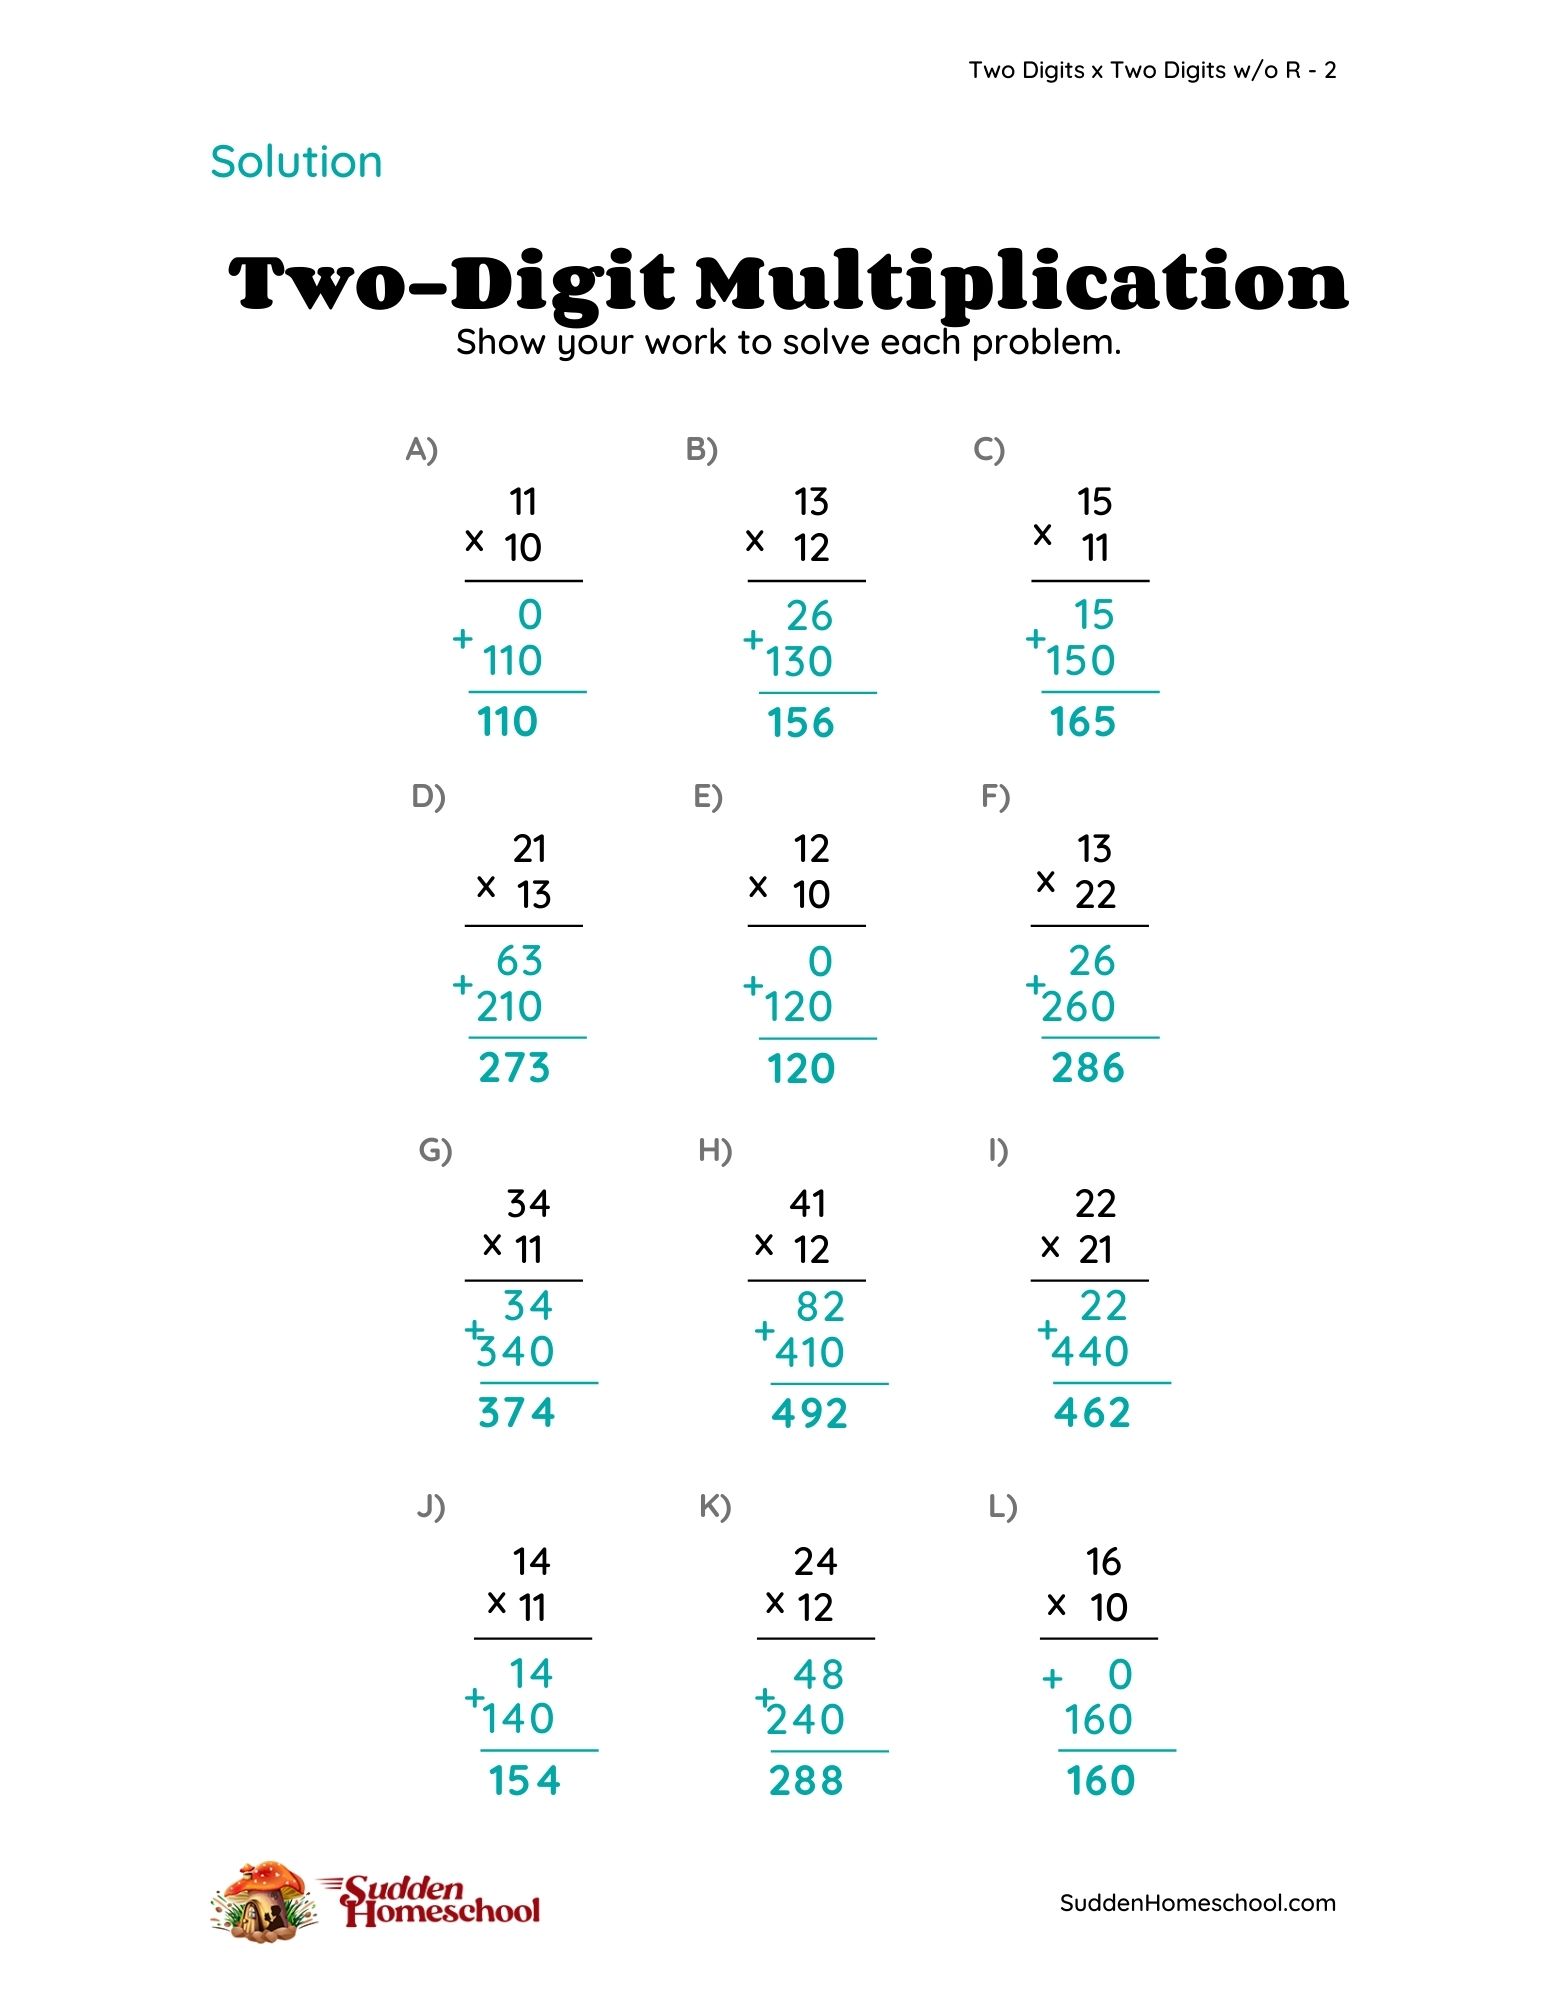 multiply-2-digits-x-2-digits-without-regrouping-5-worksheets